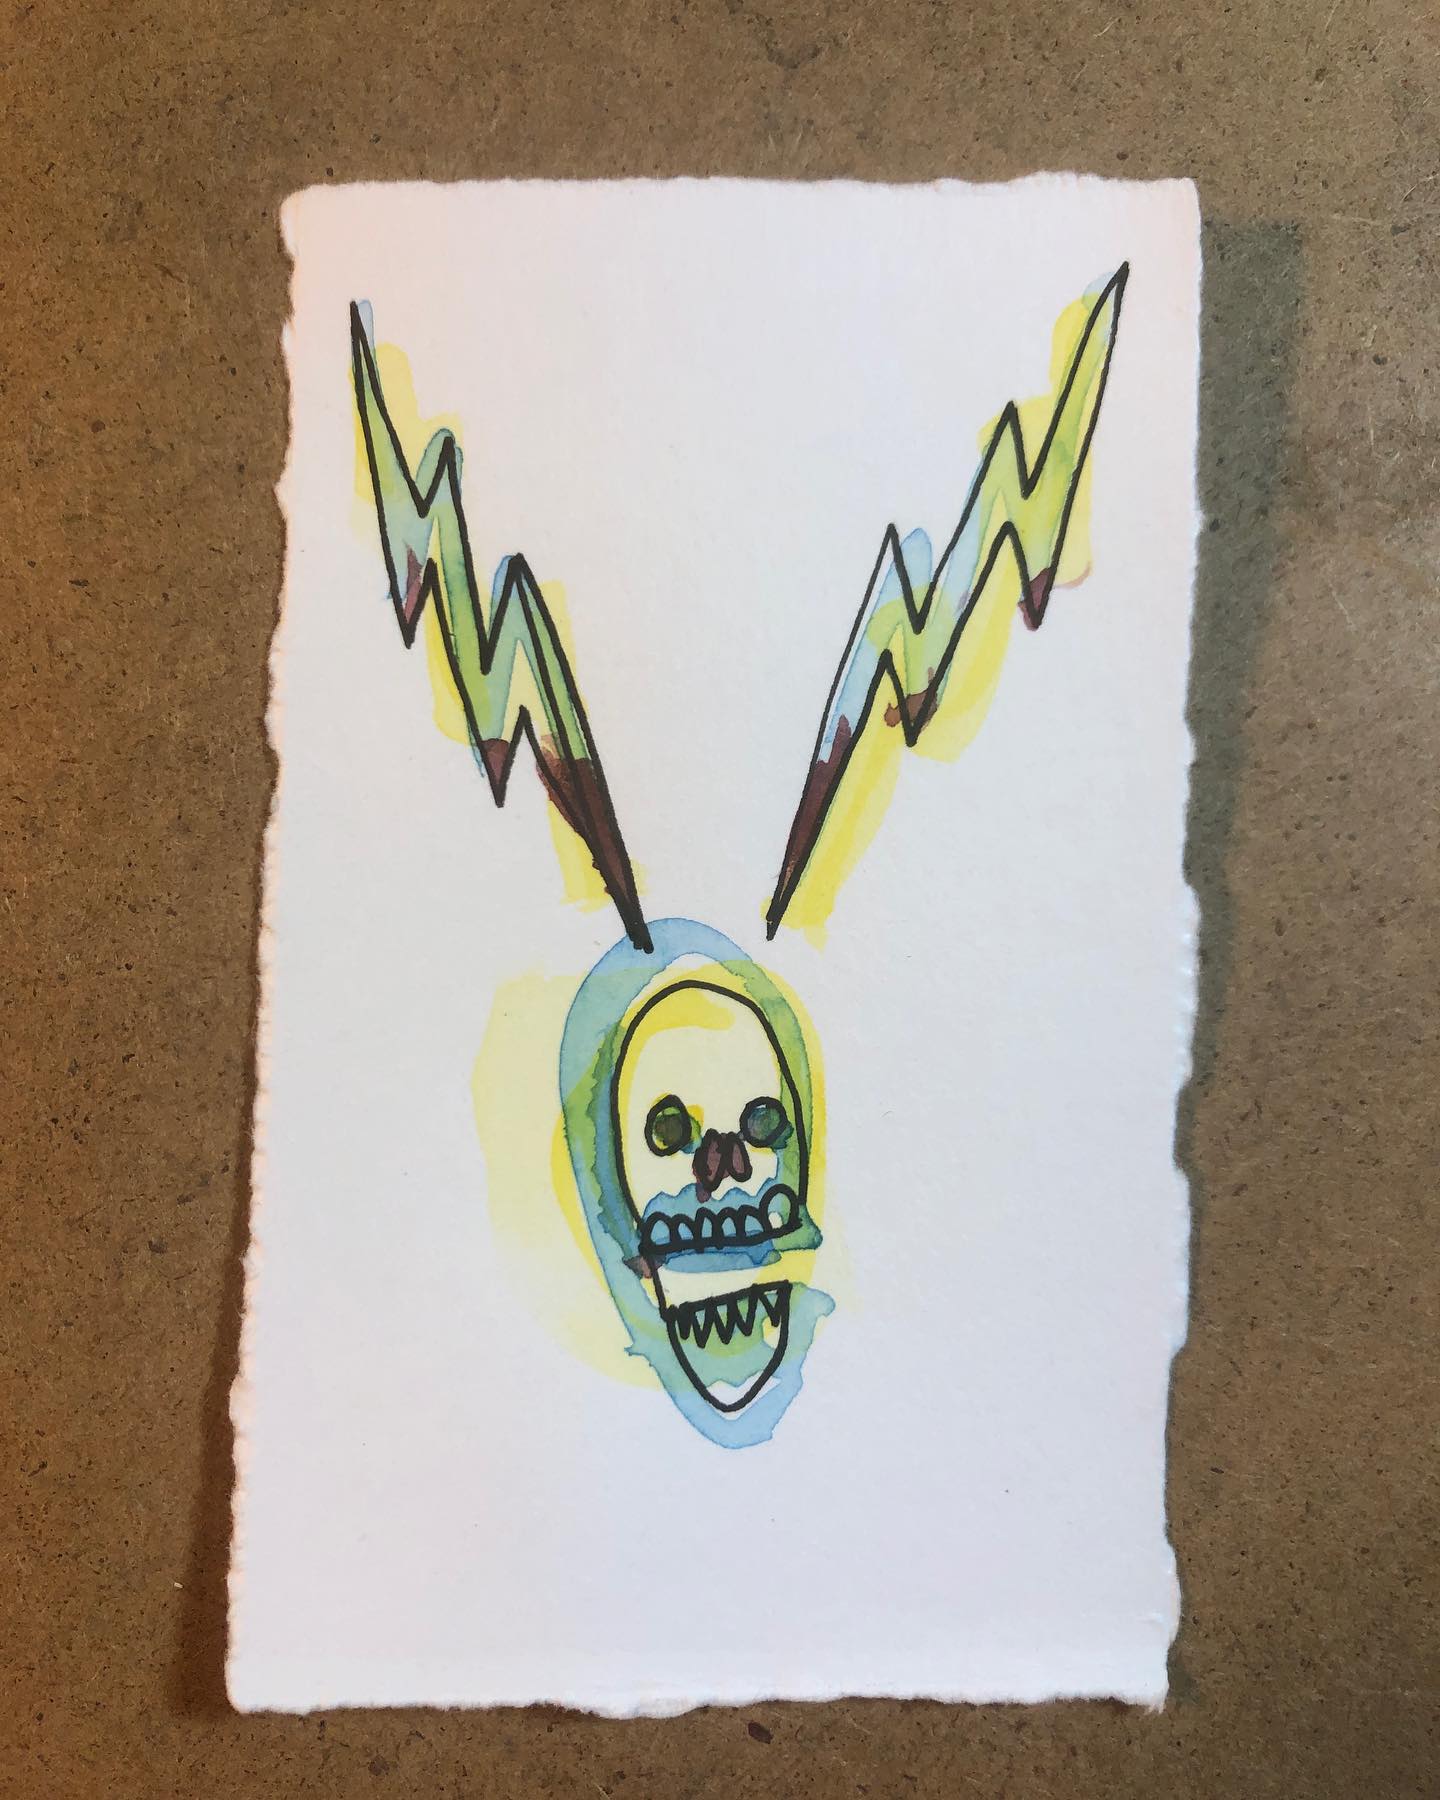 Watercolor and ink drawing of a skull/head with lighning bolts projecting from either side of the head